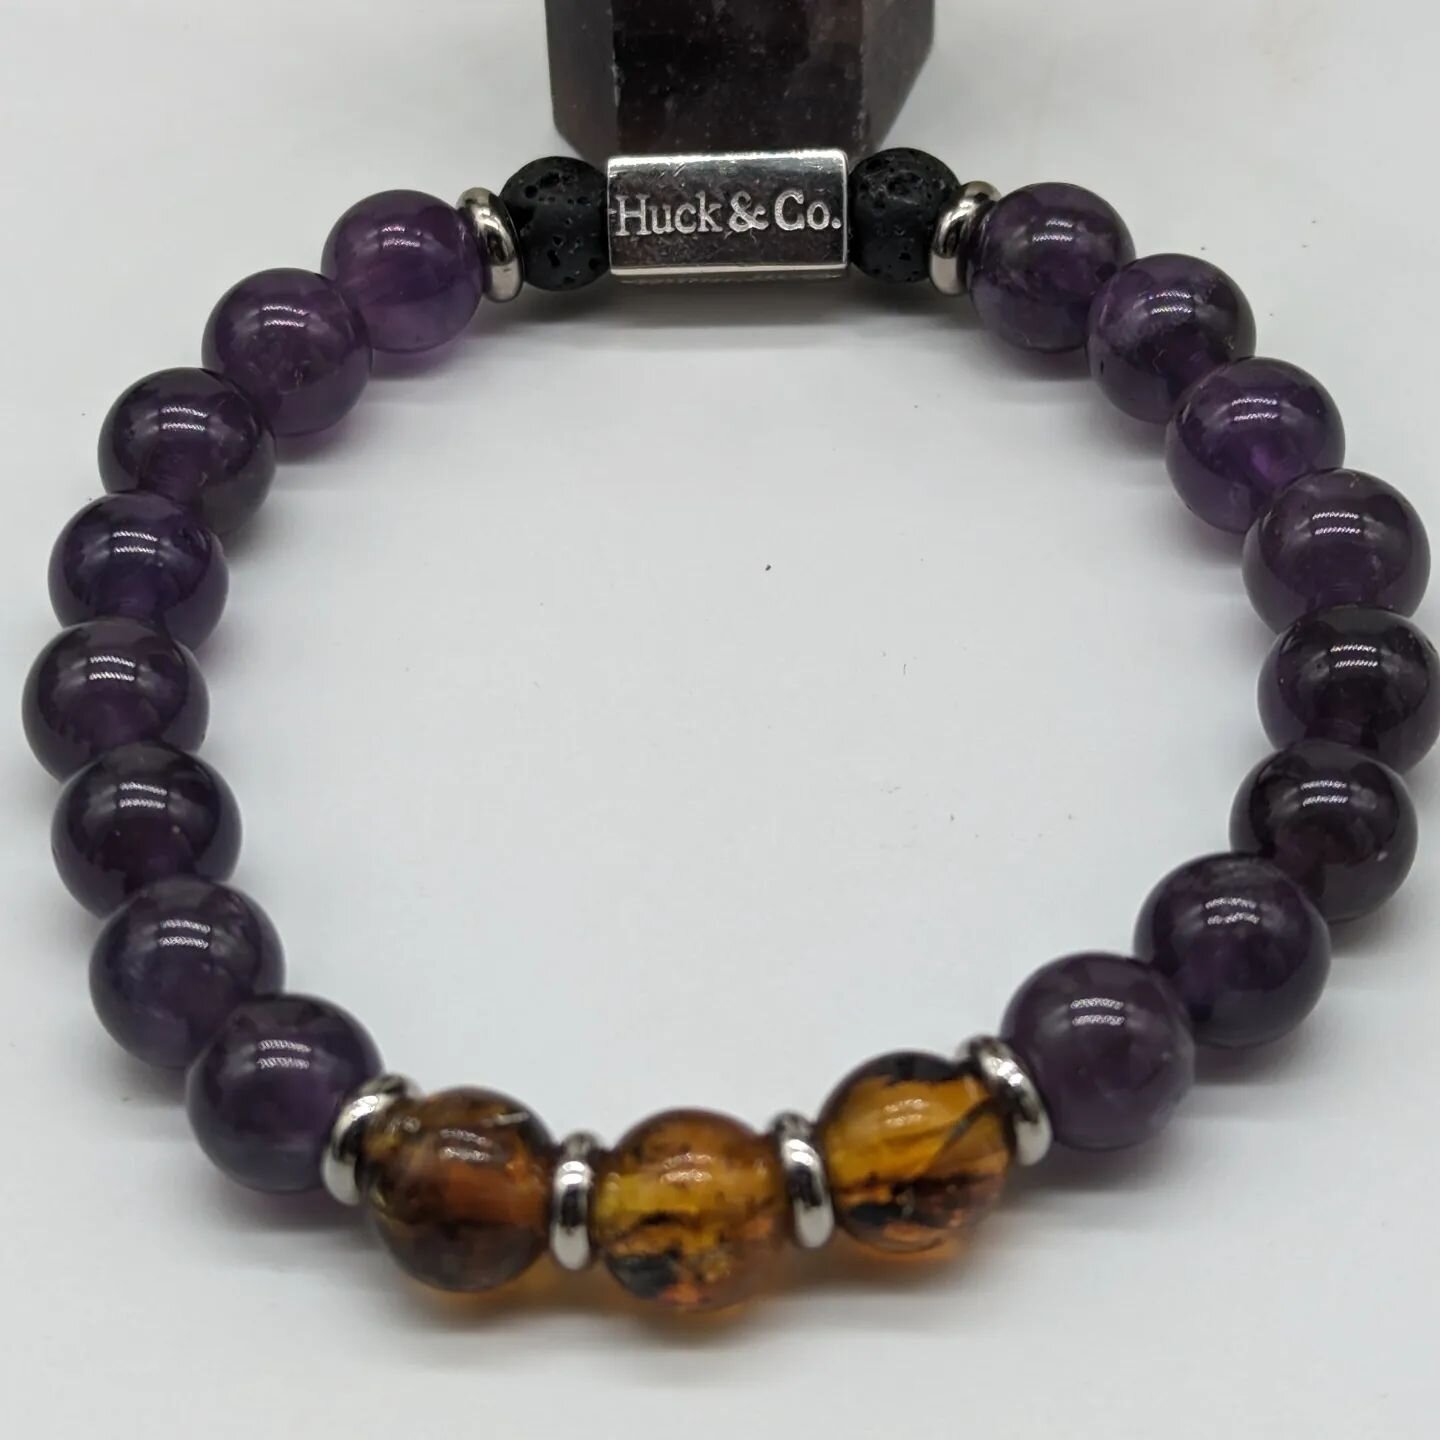 Purity
The mother healer.. appropriate for mother's day.  Amethyst for overall healing and bringing the overworked back to center.  Healing amber from Chiapas.  Removes pain and promotes healing. Black onyx for wisdom and grounding. 
#mothersdaygift 